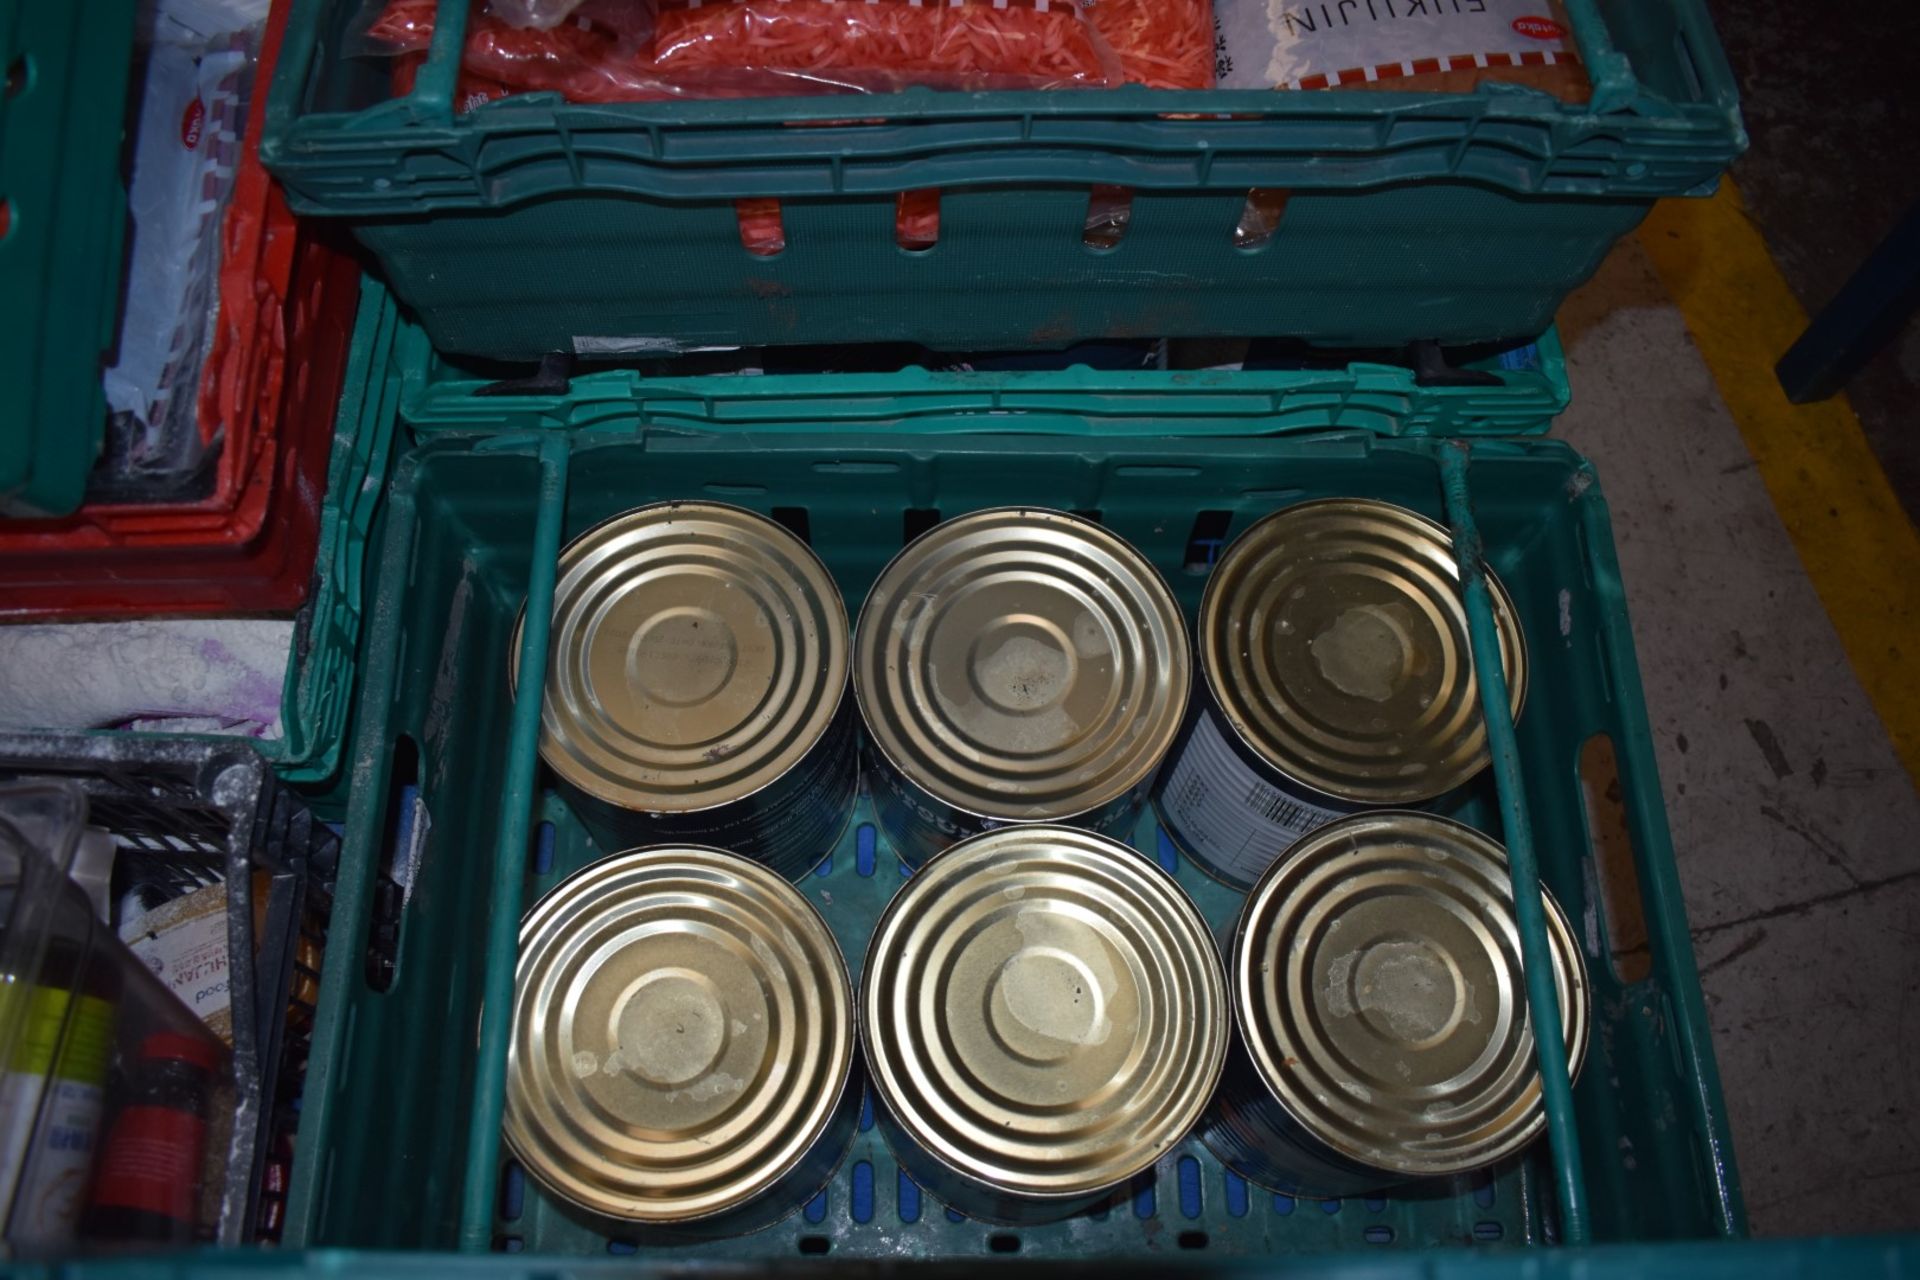 Assorted Collection of Food Items - Recently Removed From Chinese Restaurant - Contents of 11 Crates - Image 44 of 44